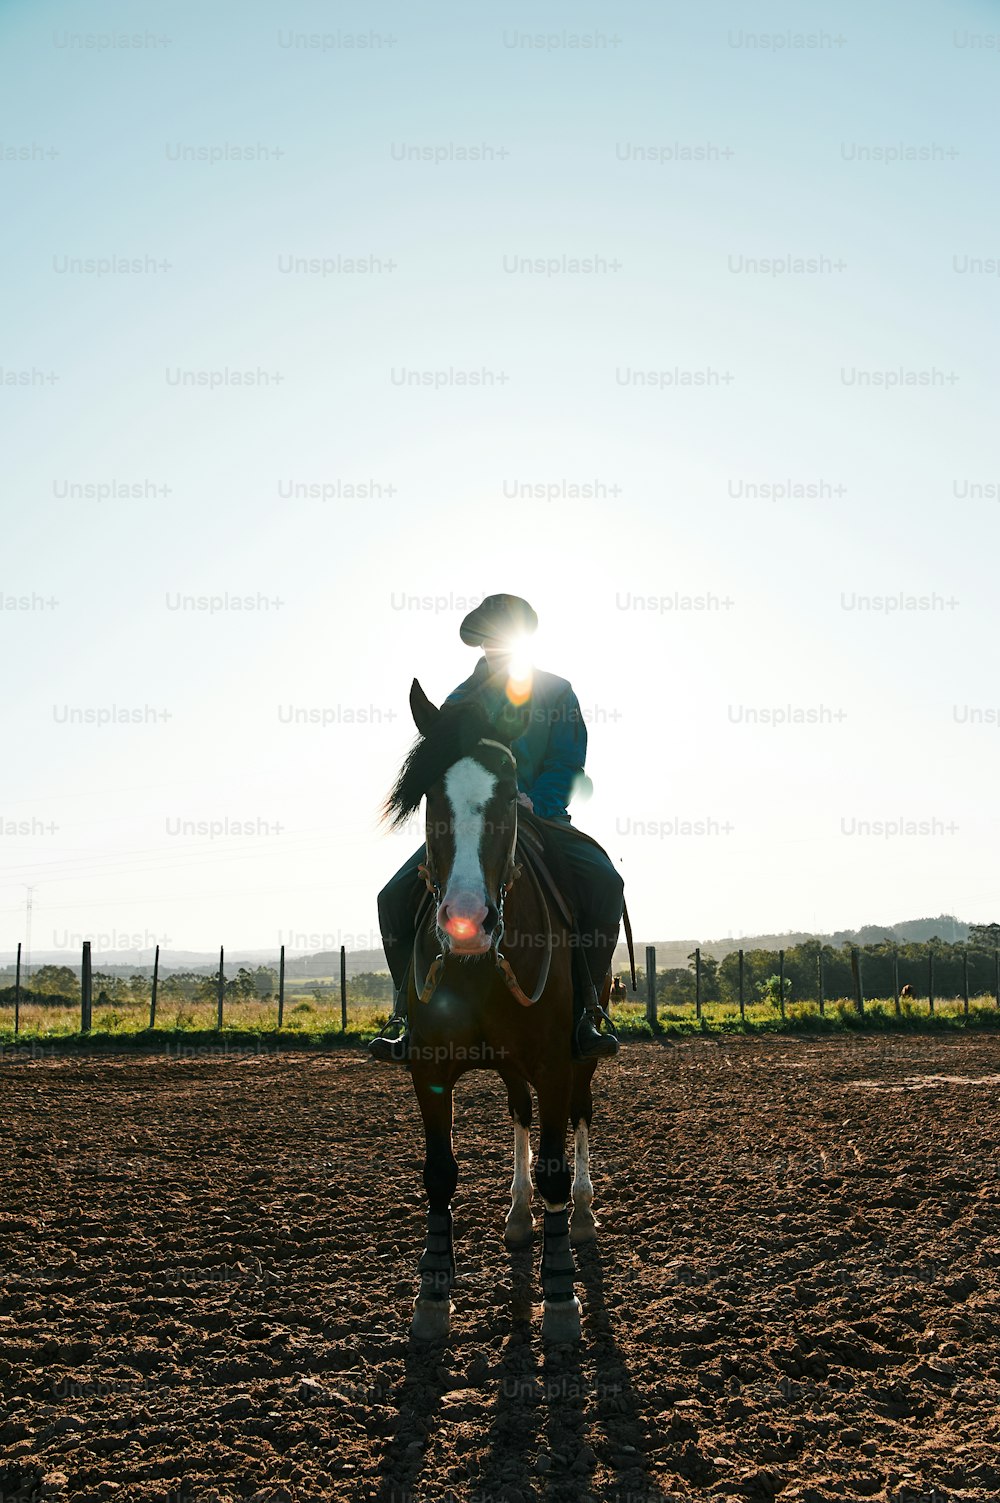 a person riding a horse on a dirt field